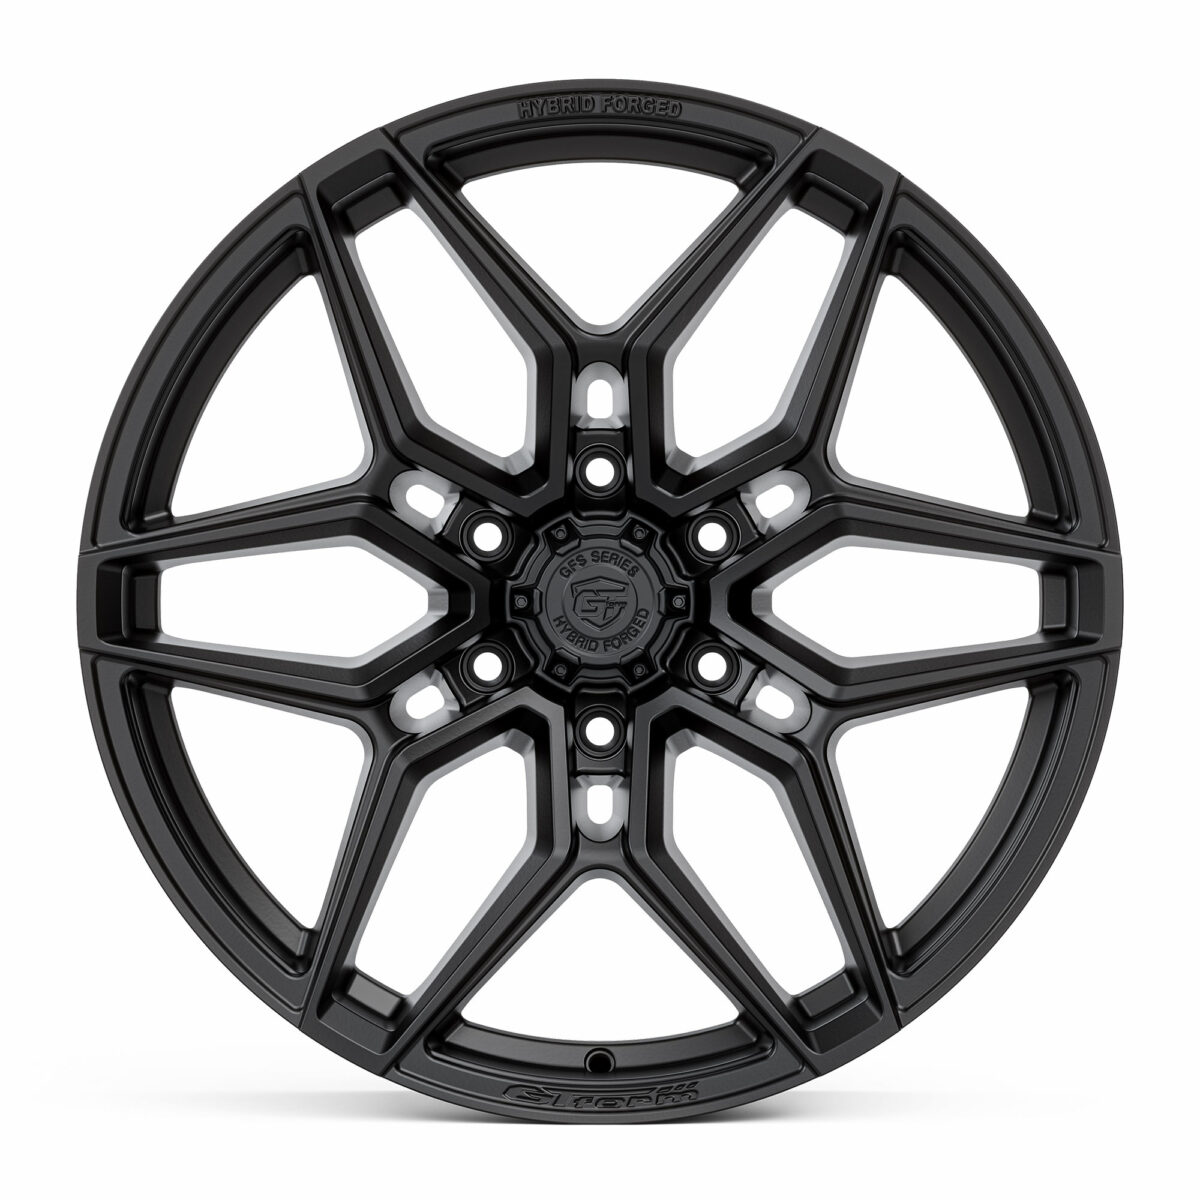 4X4 WHEELS GT FORM GFS3 HYBRID FORGED SATIN BLACK 20 INCH OFFROAD RIMS FOR 4WD SUV